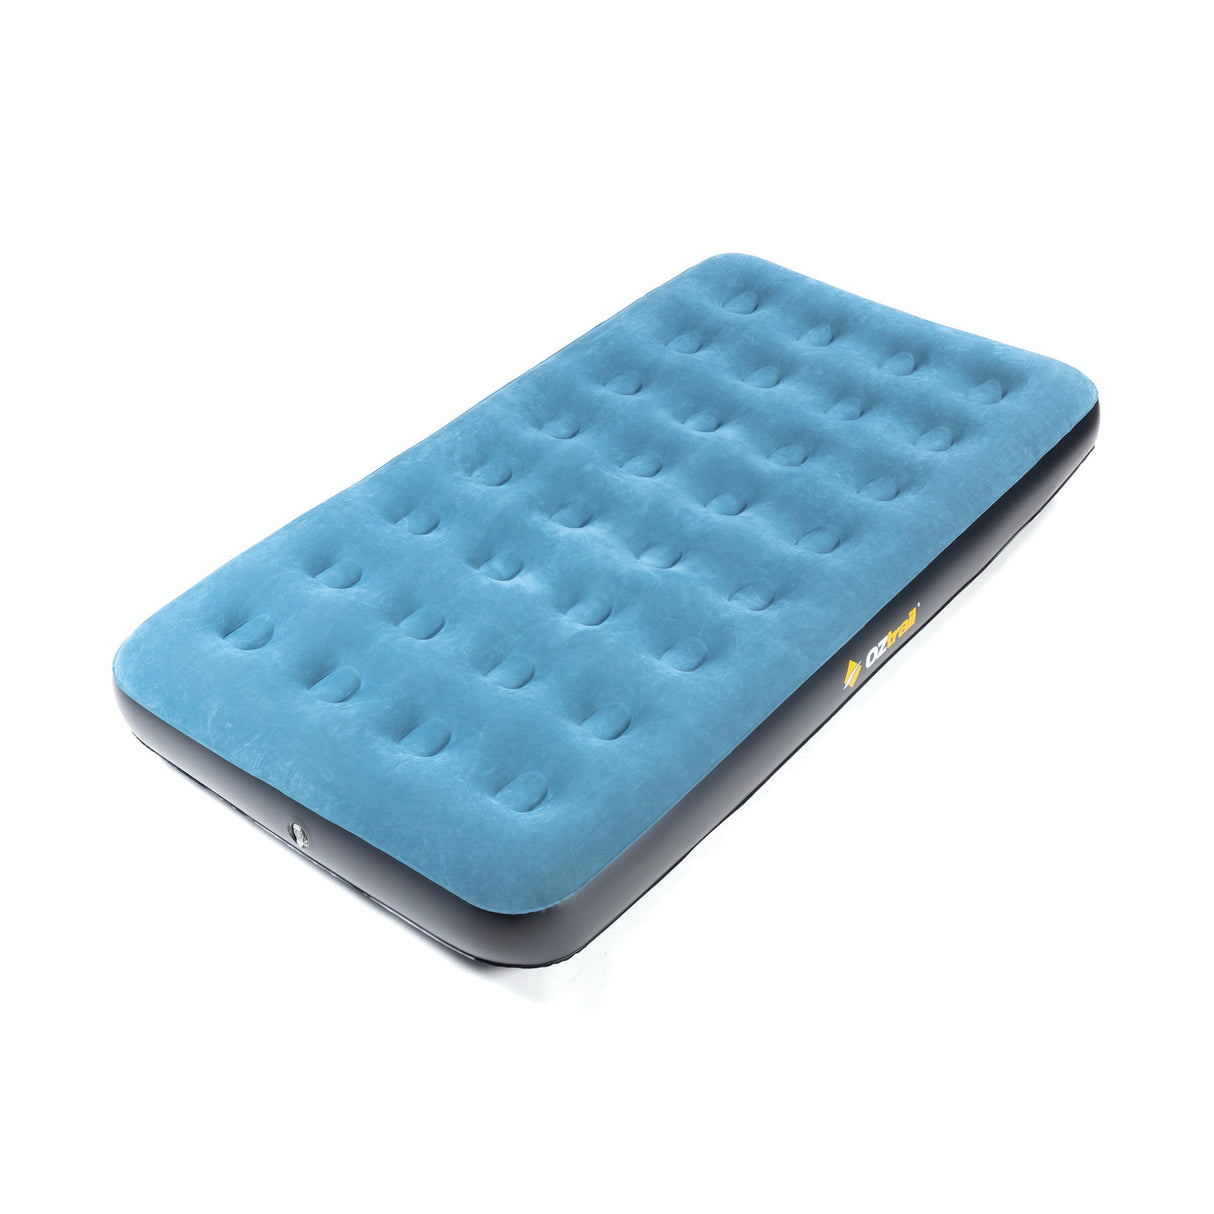 Oztrail Air Bed King Single